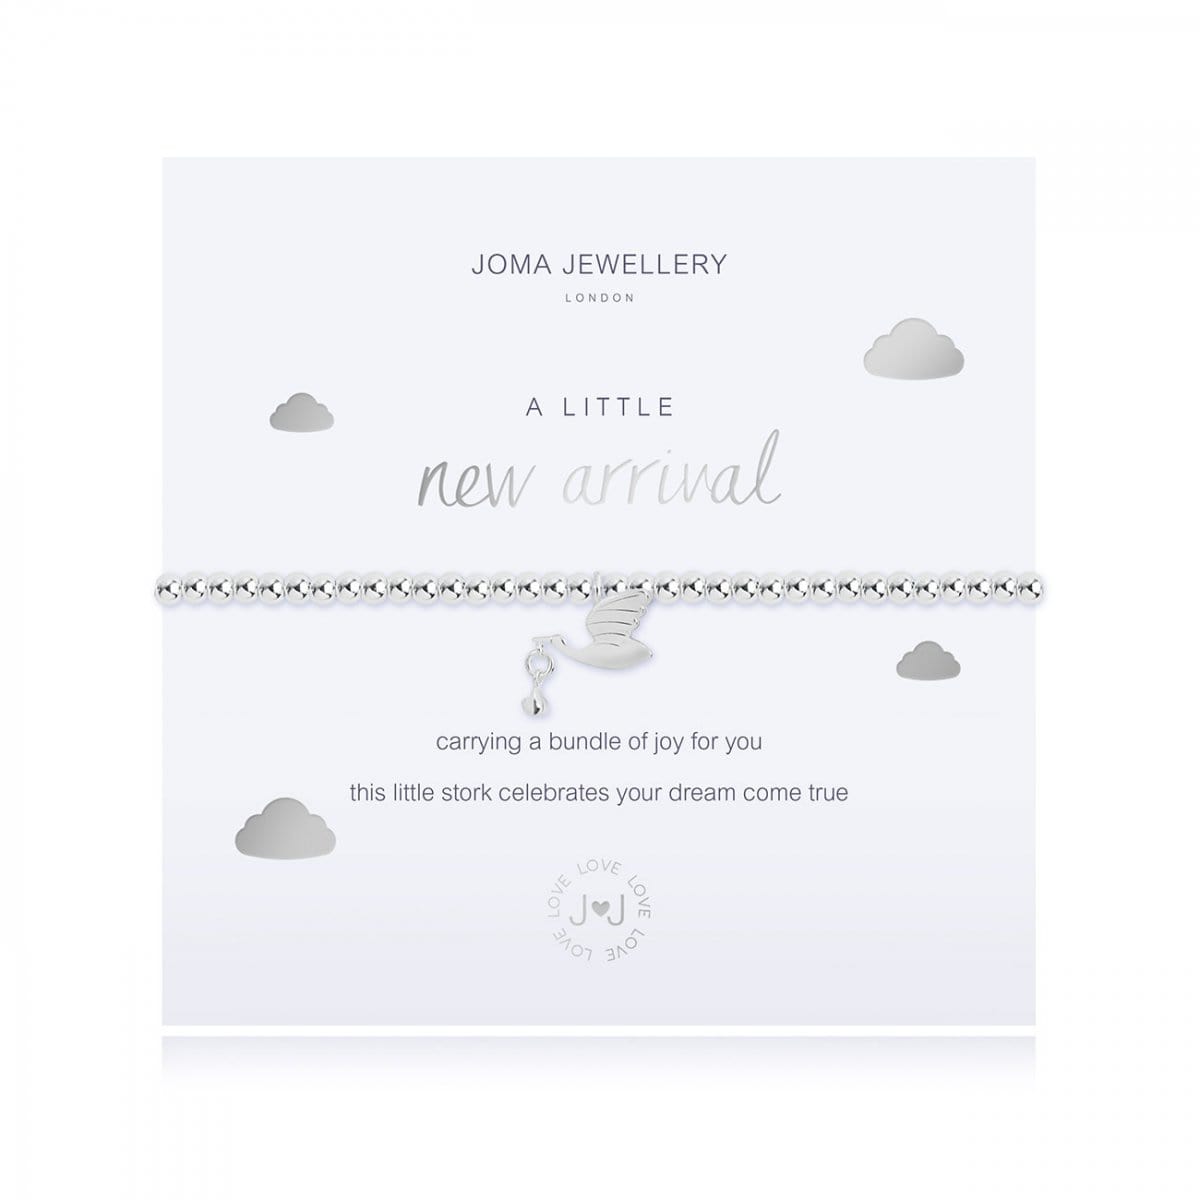 A LITTLE NEW ARRIVAL by Joma Jewellery - Bumbles & Boo